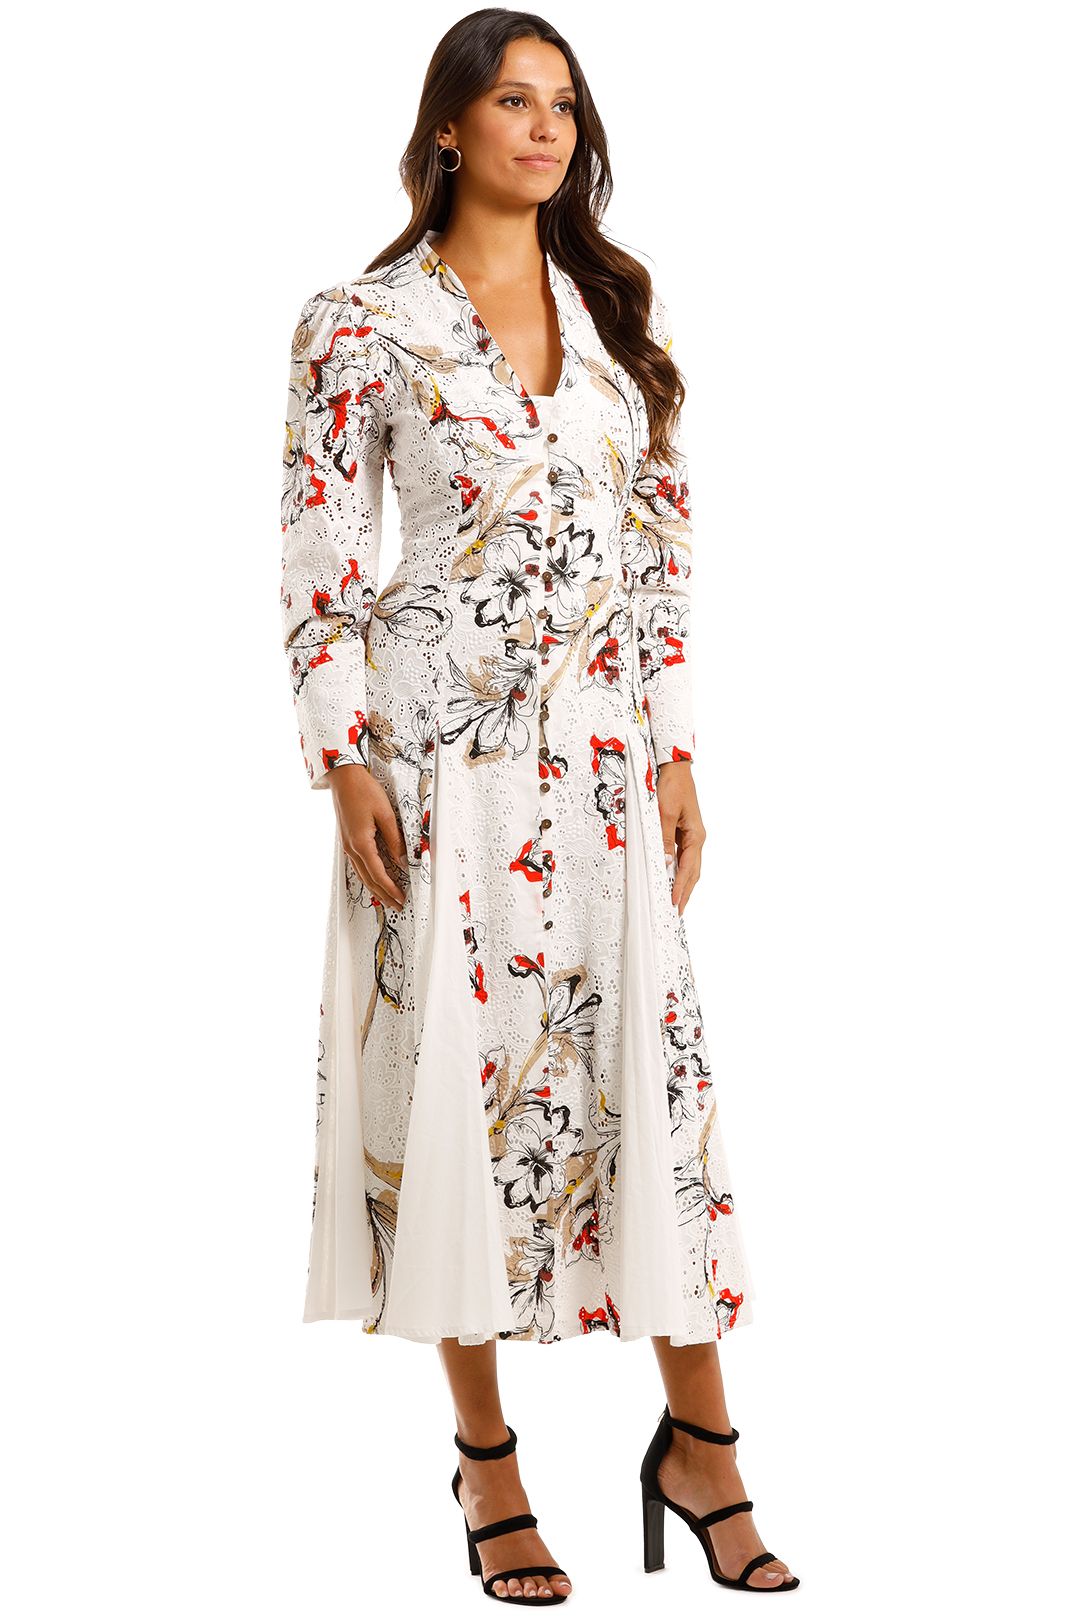 Moss and Spy Louise Button Dress Floral Long Sleeve